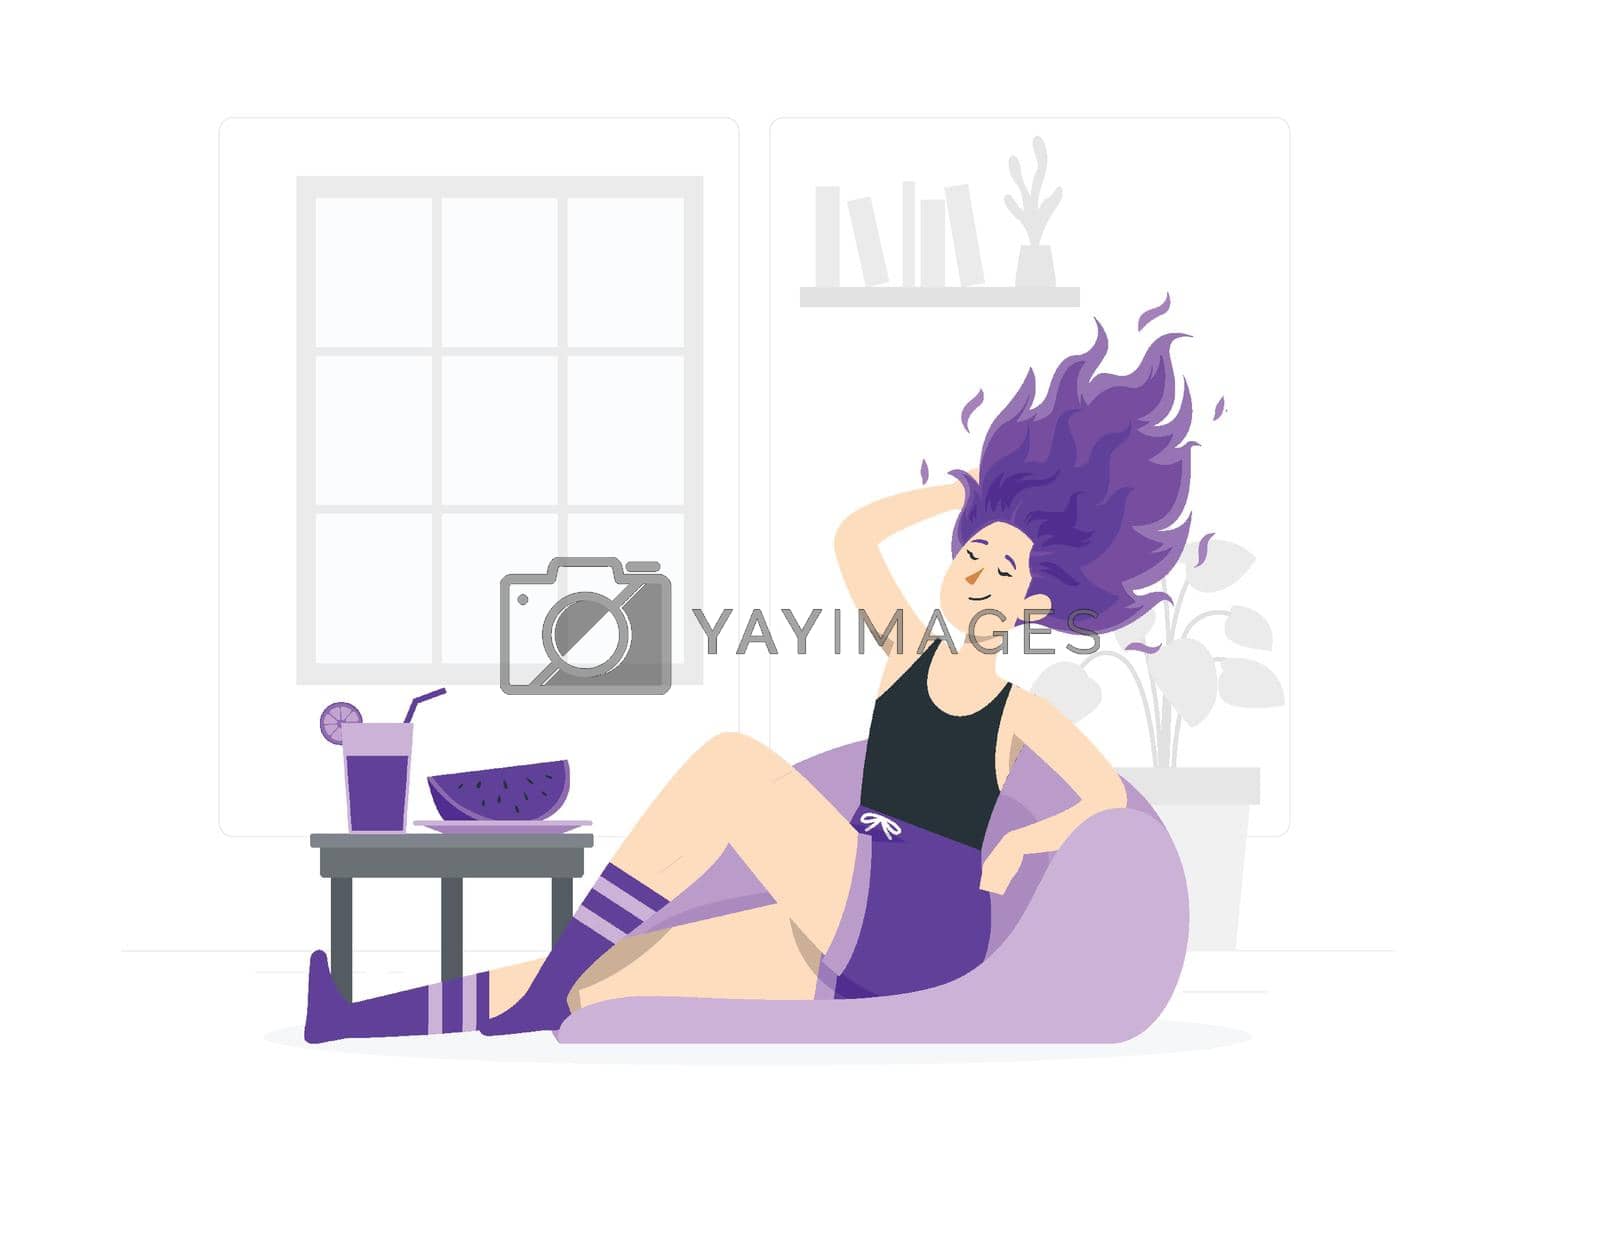 Royalty free image of Girl with purple fire hair flat design by Vinhsino